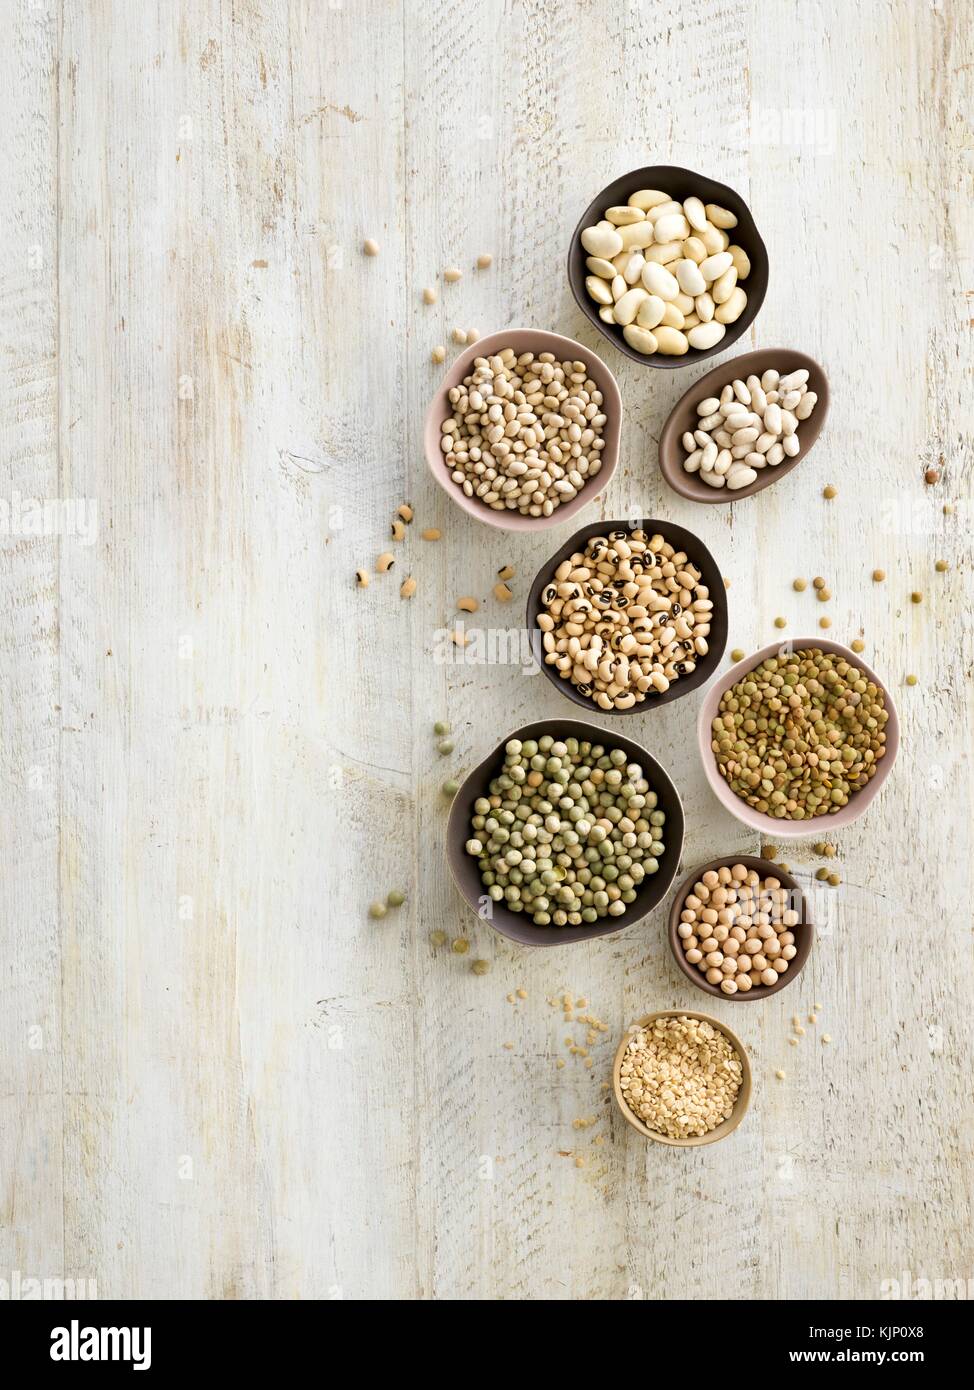 Pulses in bowls, overhead view. Stock Photo